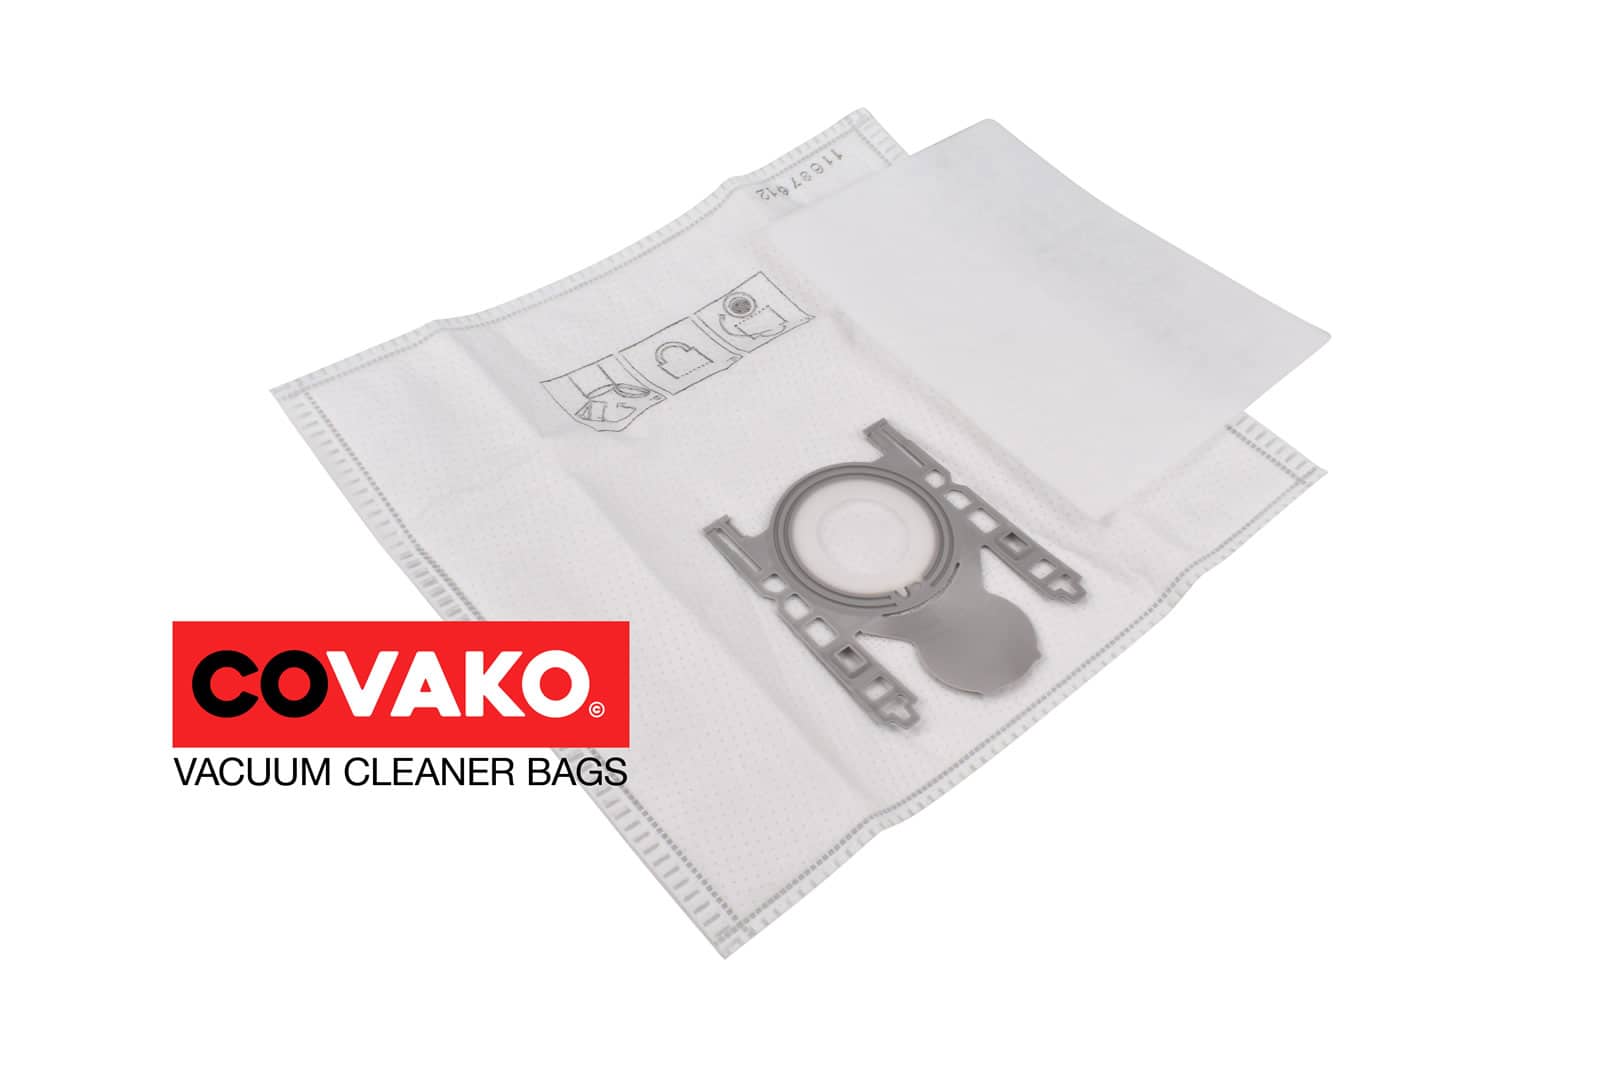 Bosch BBS 6400-6999 / Synthesis - Bosch vacuum cleaner bags